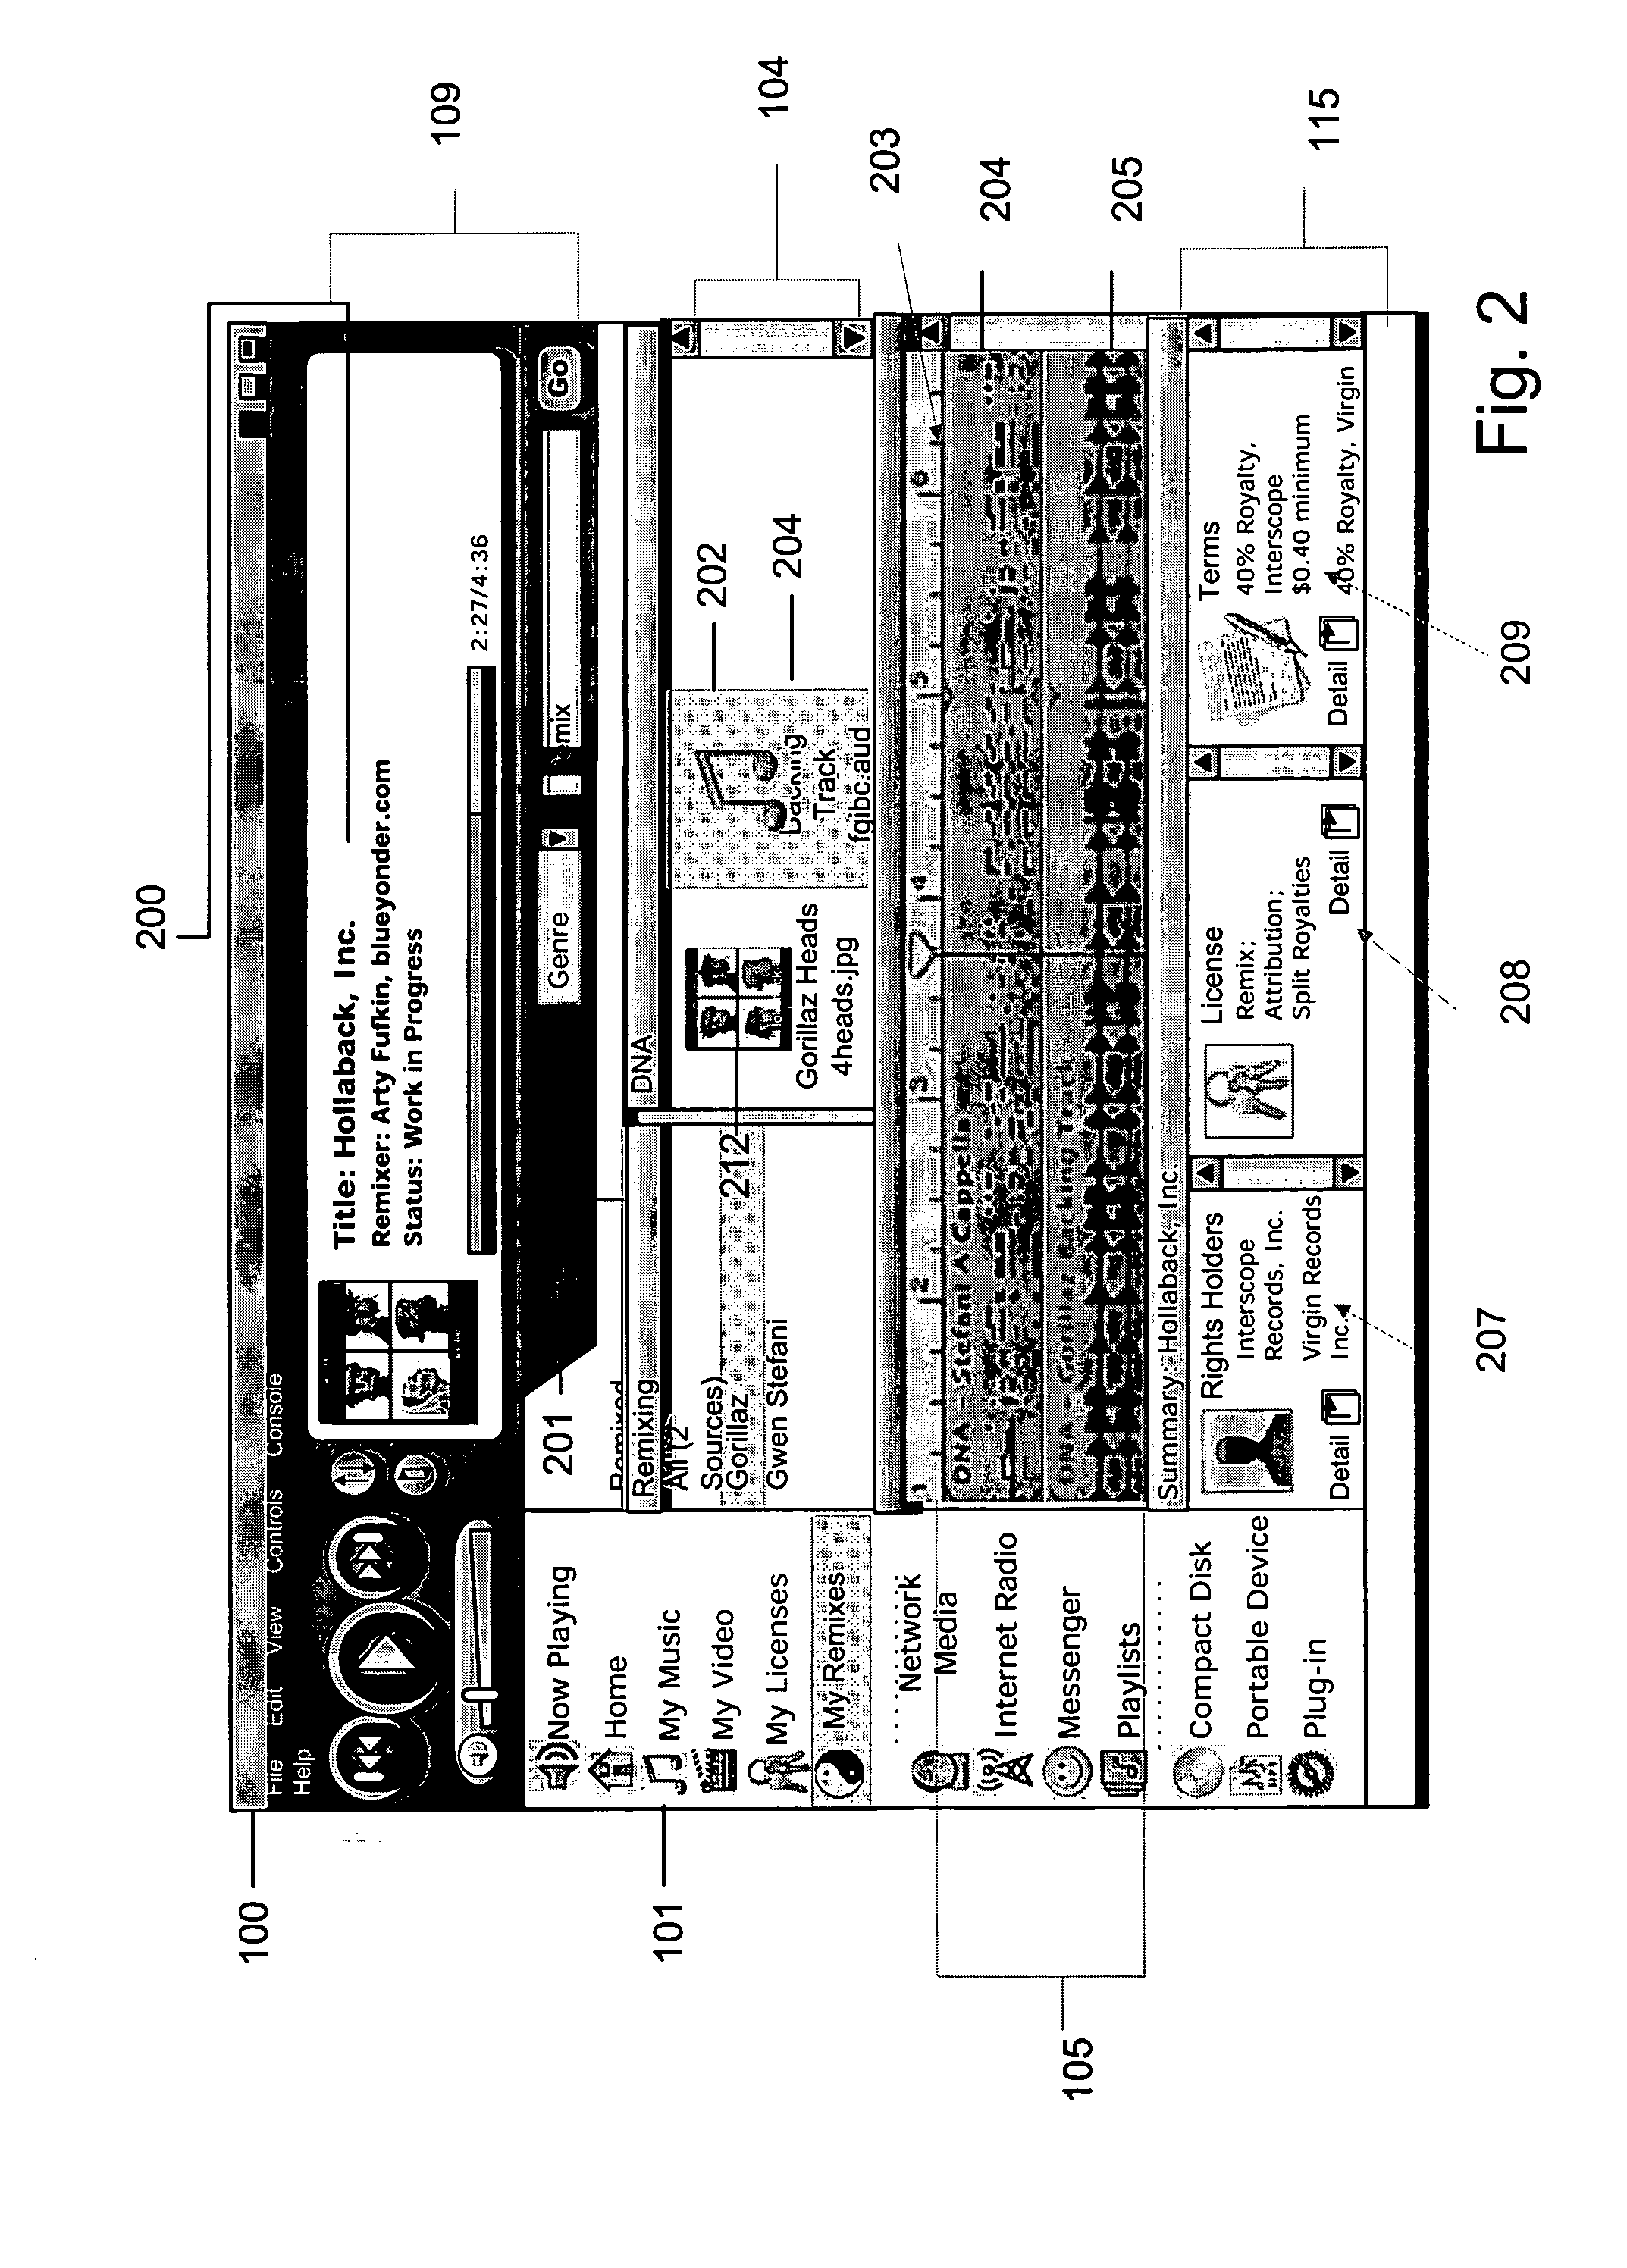 Data container and set of metadata for association with a media item and composite media items